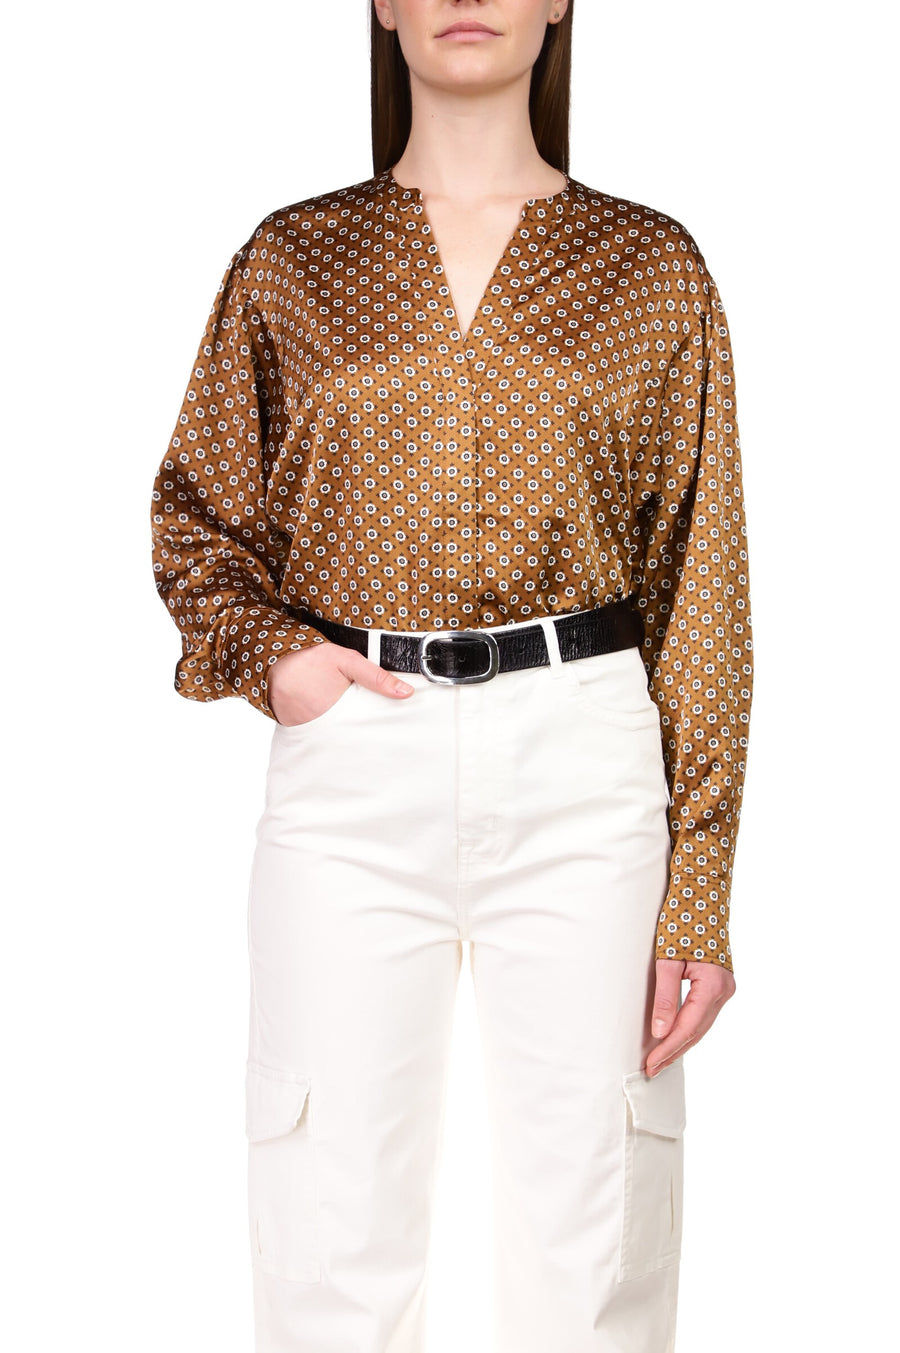 Relaxed Modern Blouse